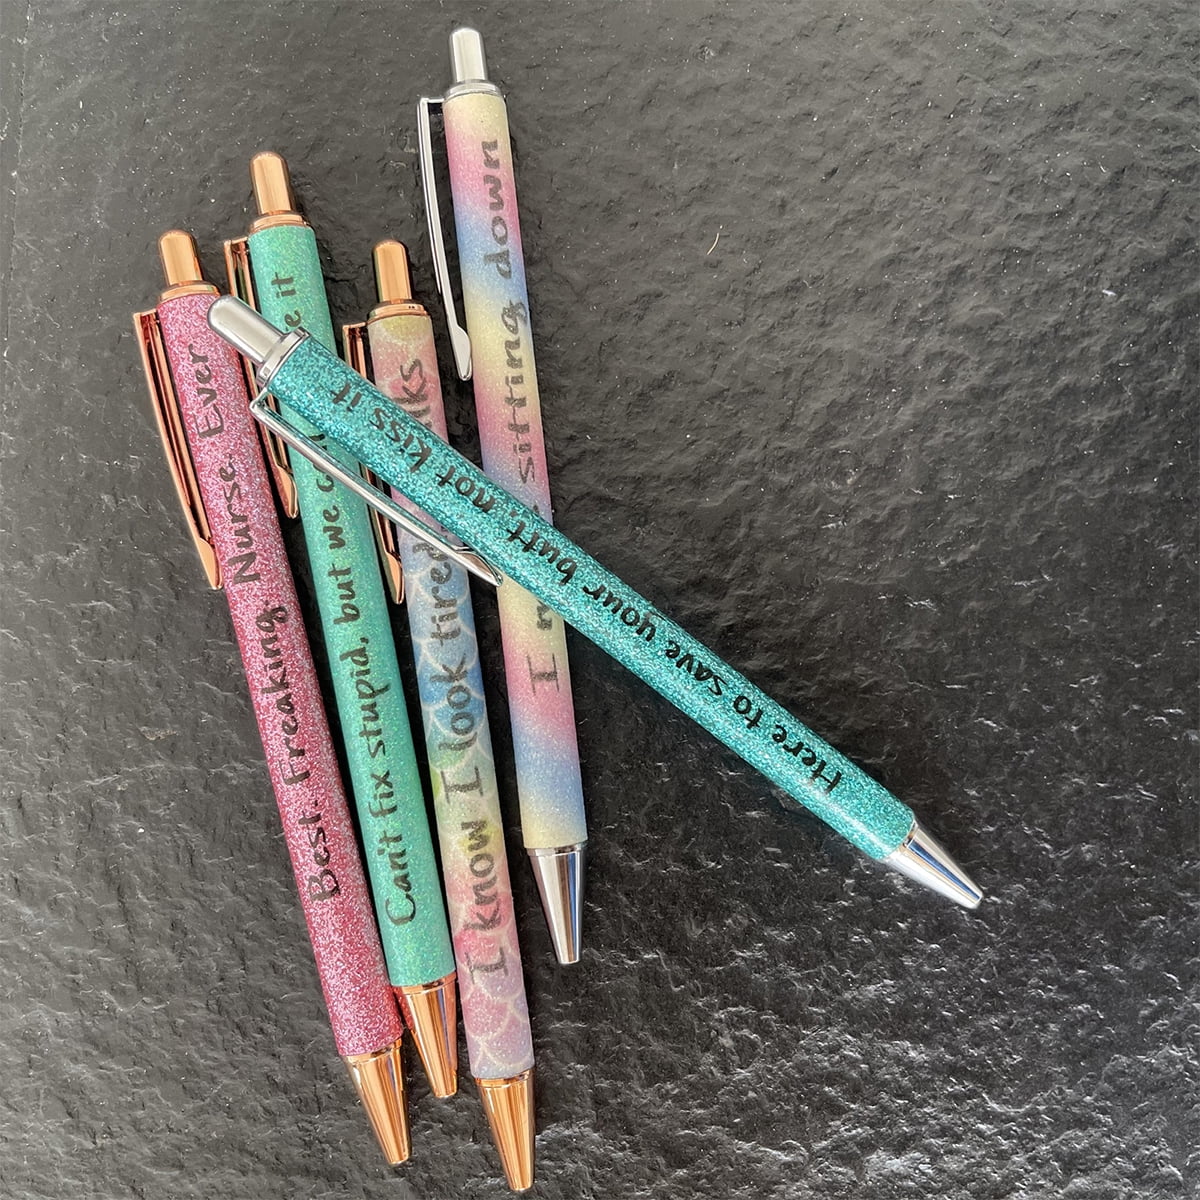 Fun Ballpoint Pen Novelty Pens with Funny Quotes Sparkly Colored